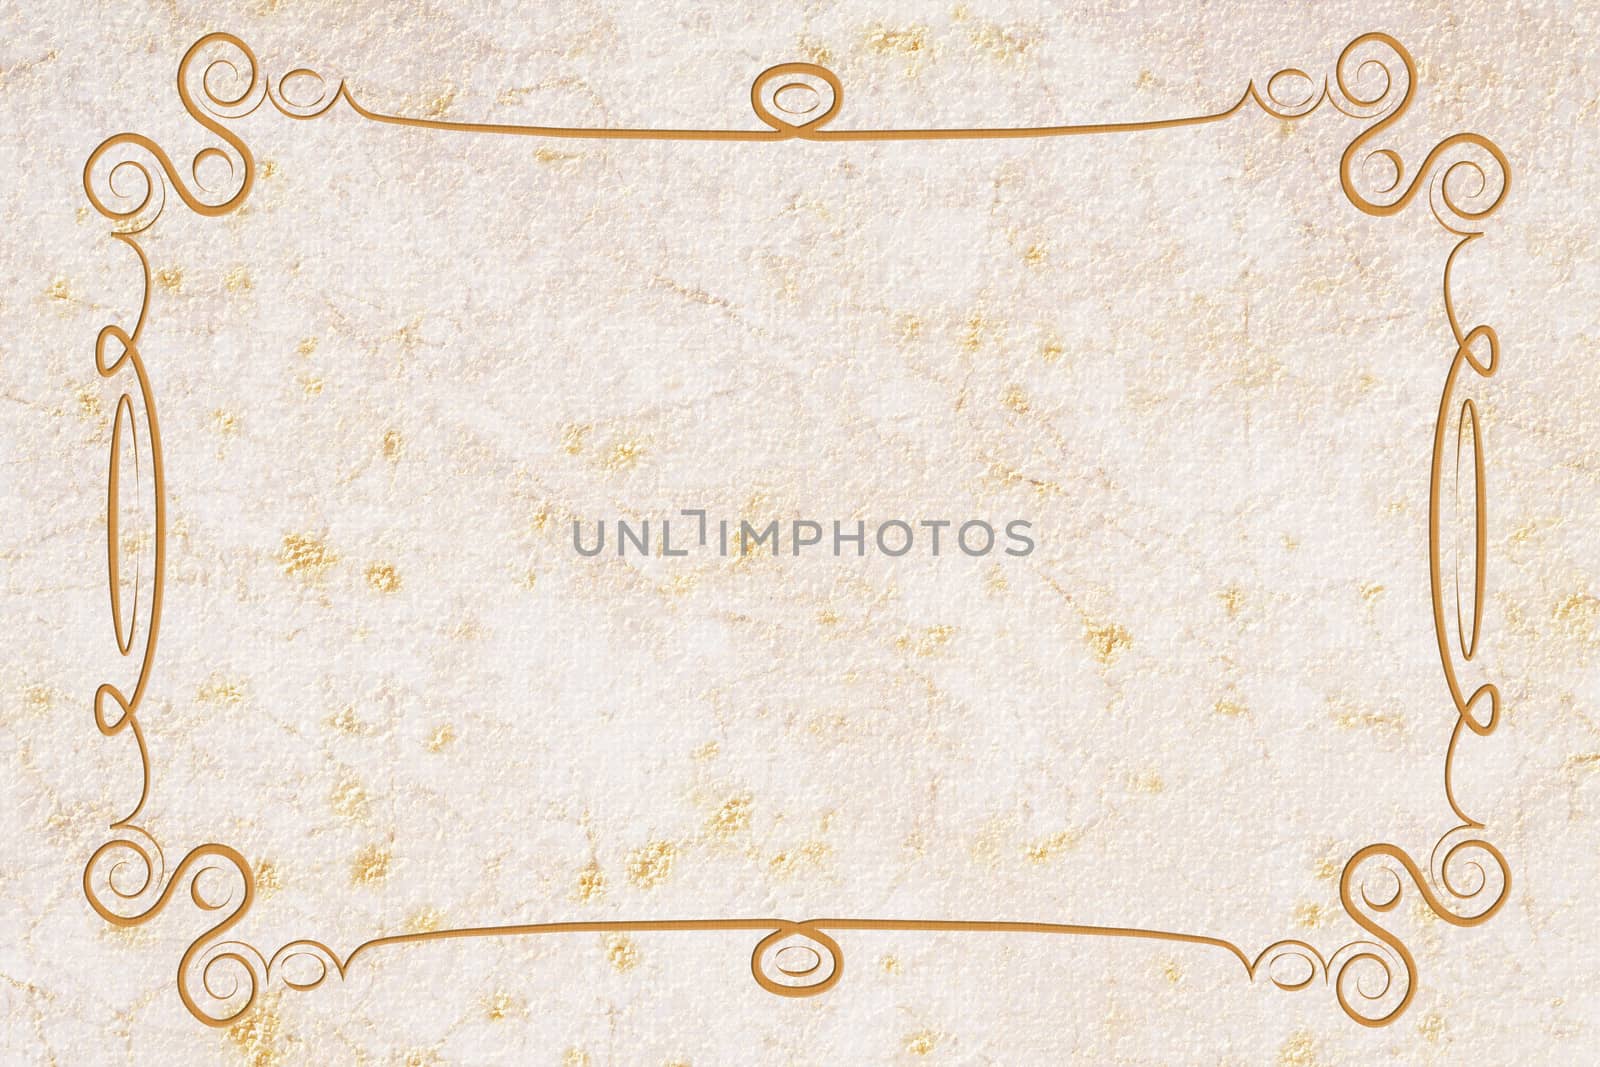 An antique decorative frame with a background with texture. Yellow, white and brown colors